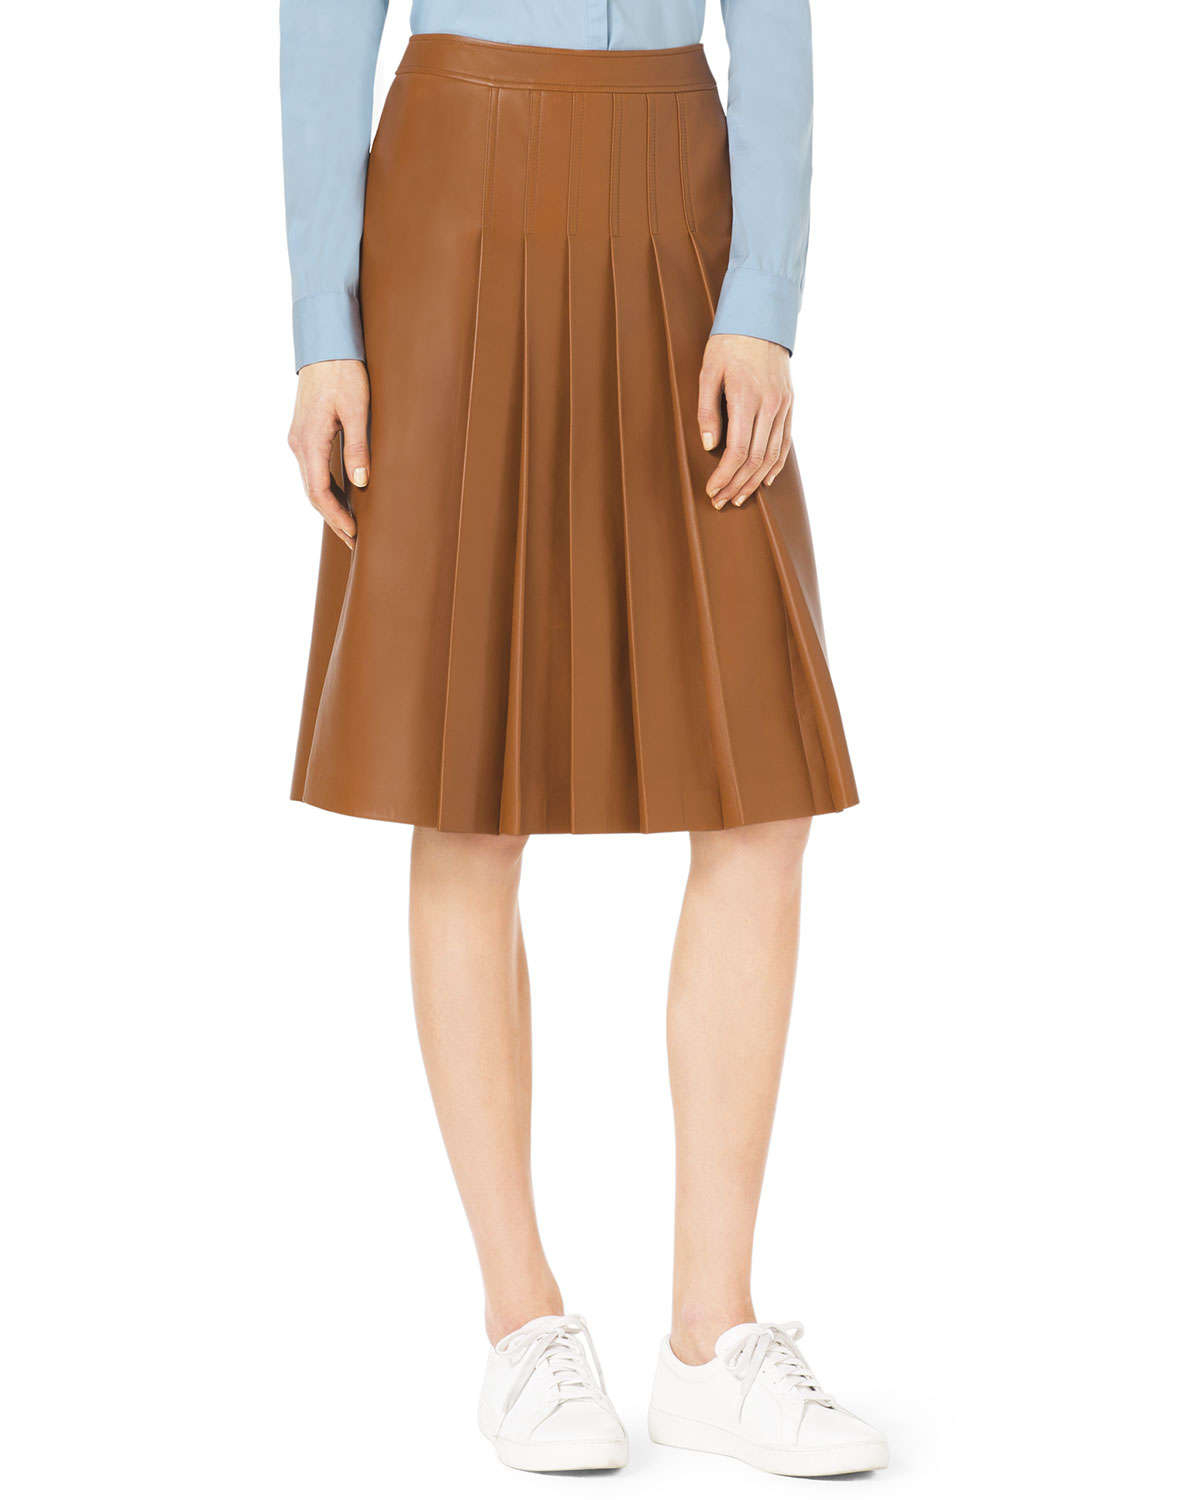 Lyst - Michael Kors Knee-length Pleated Leather Skirt in Brown